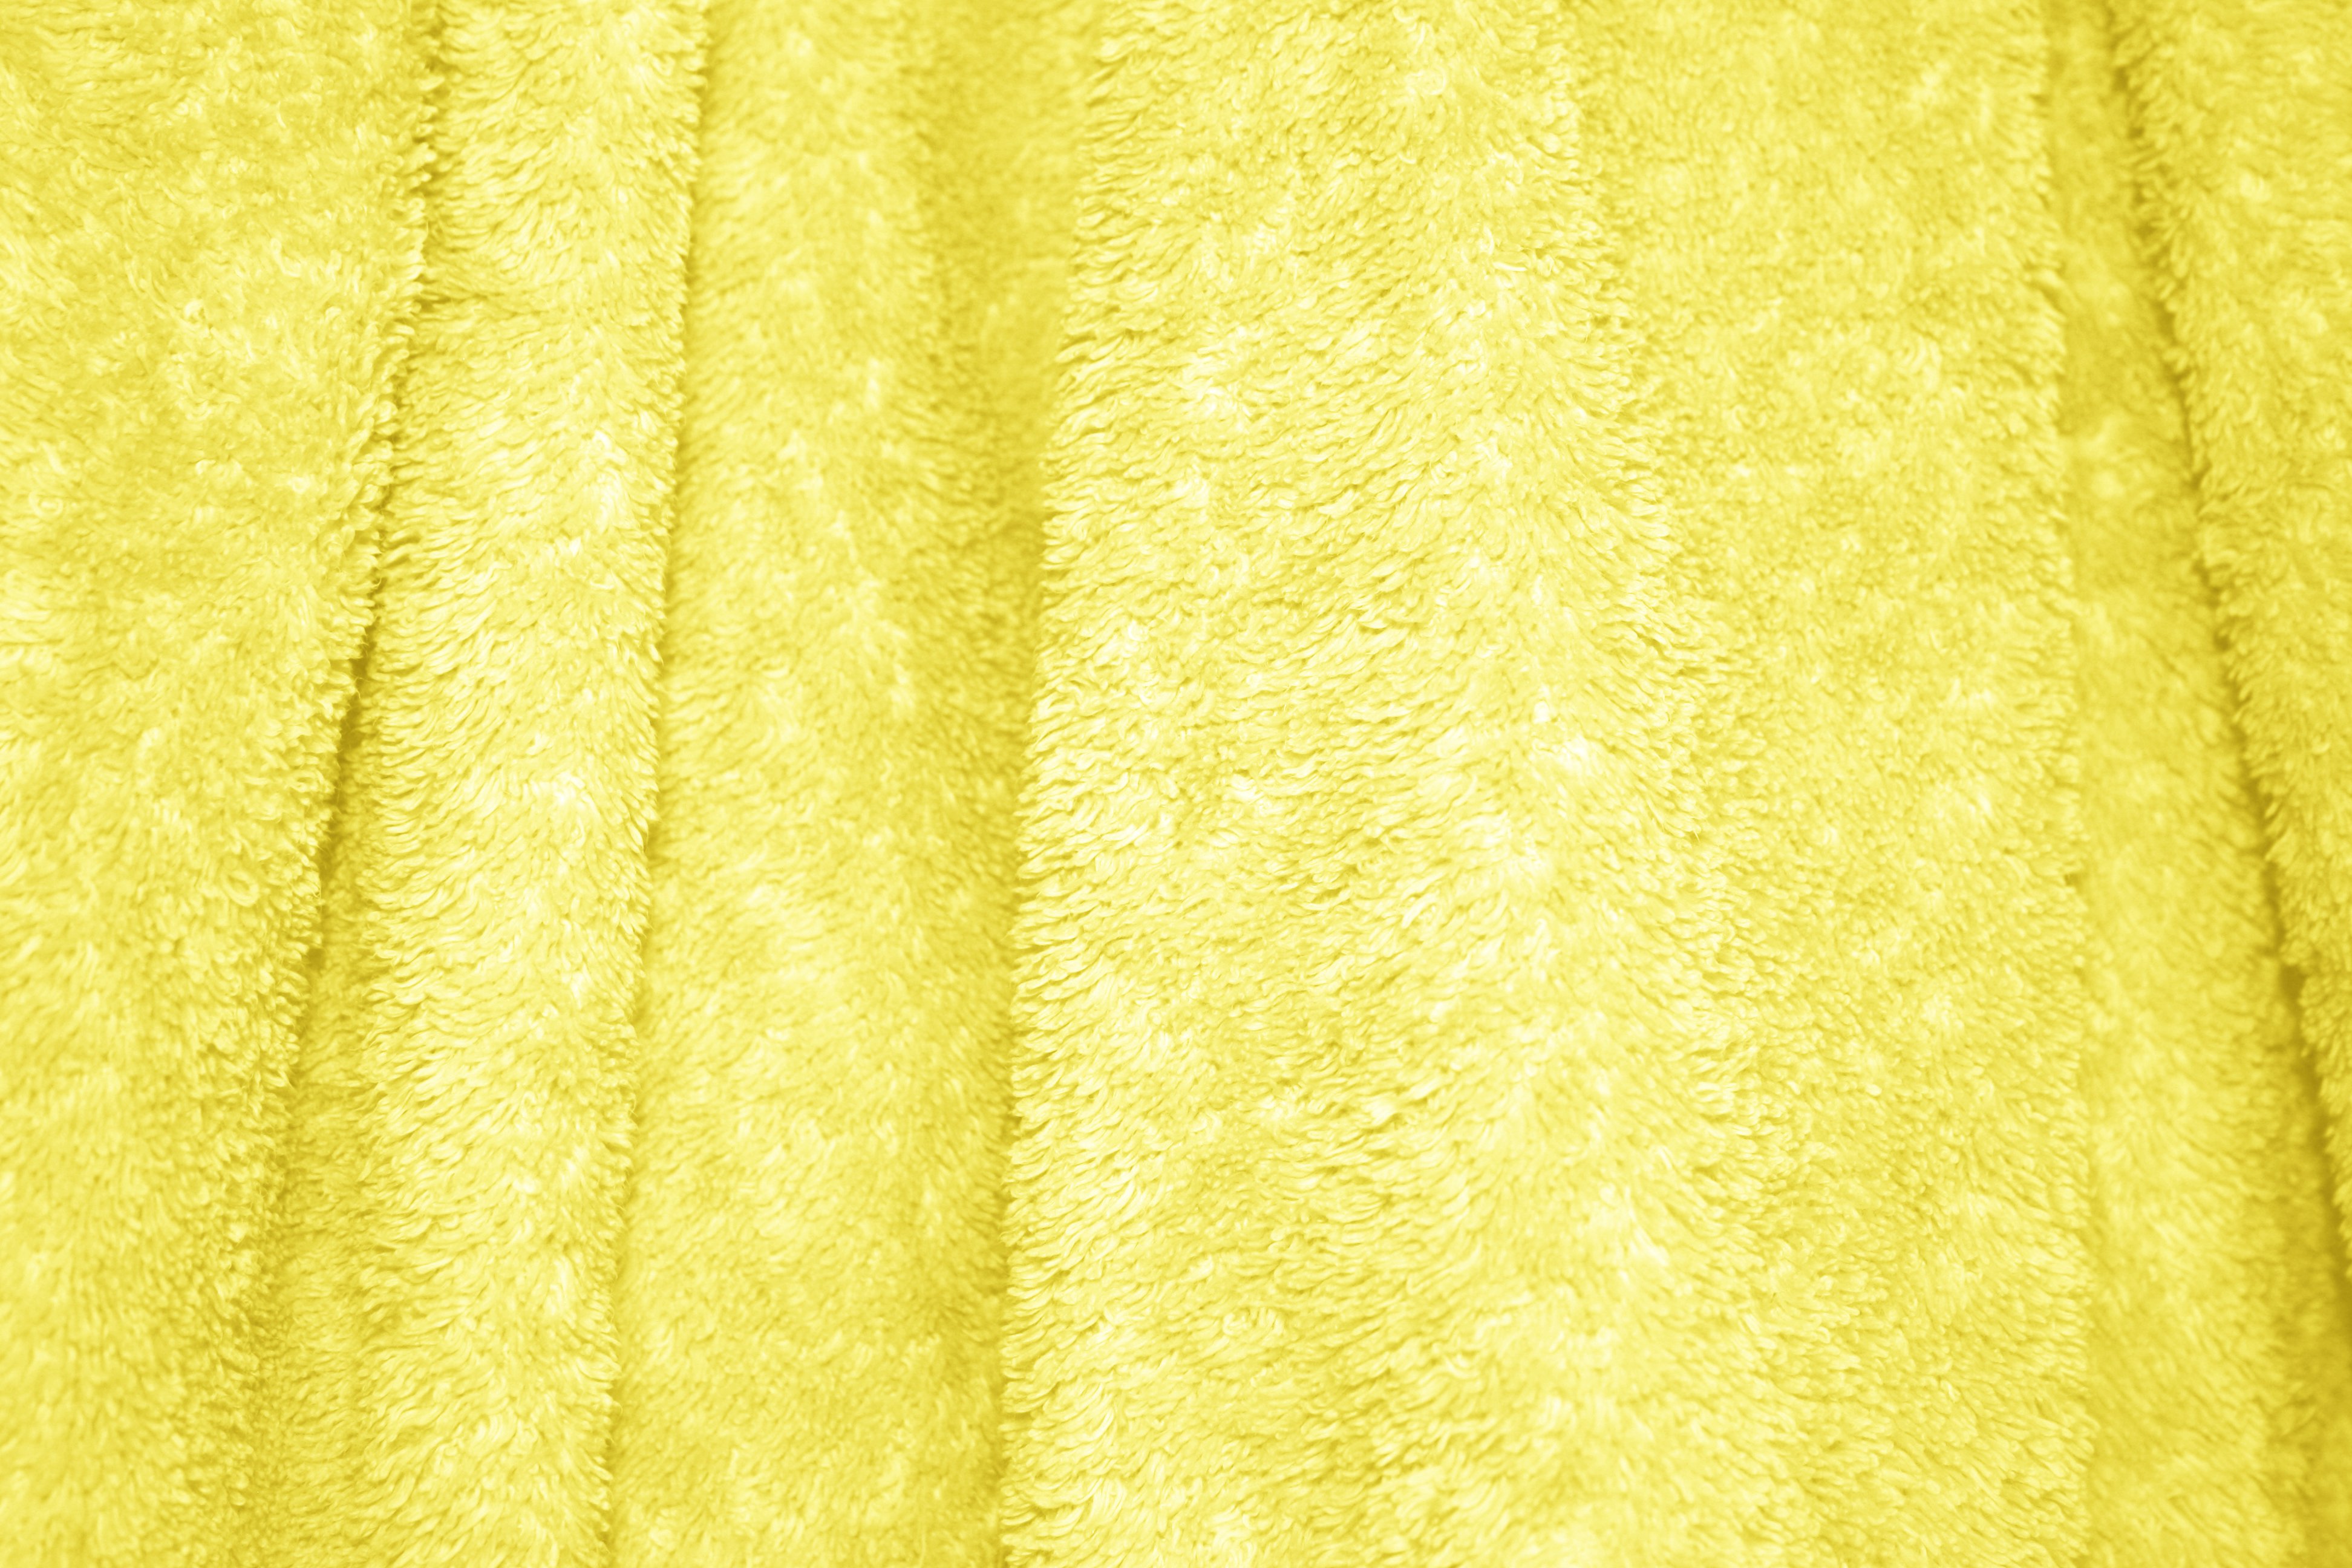 Yellow Terry Cloth Bath Towel Texture Picture | Free Photograph ...